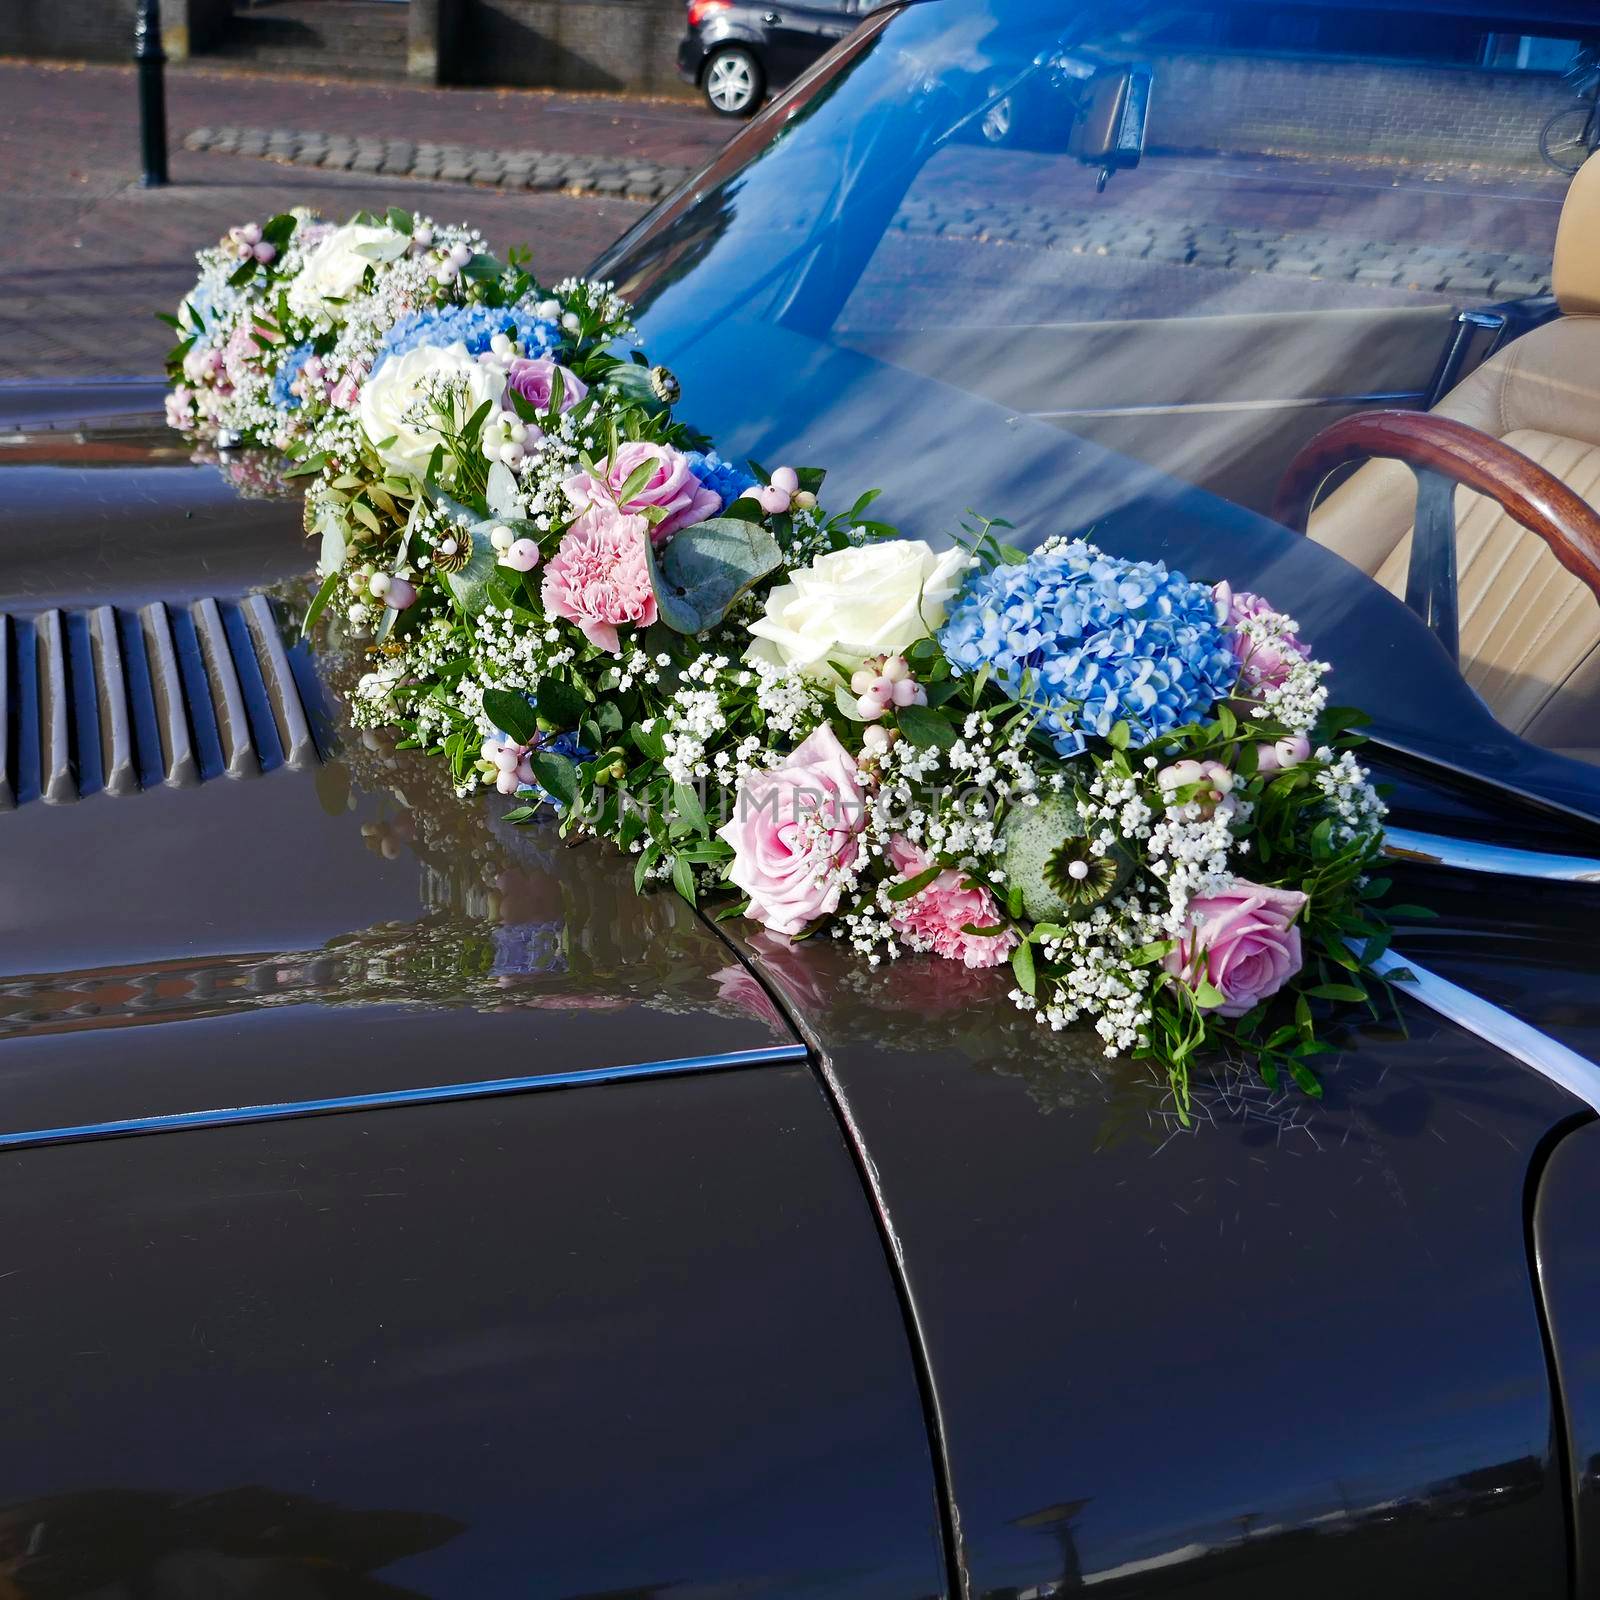 A flower-decorated car for a wedding. It's a classic brown convertible with a floral garland between the hood and the windshield